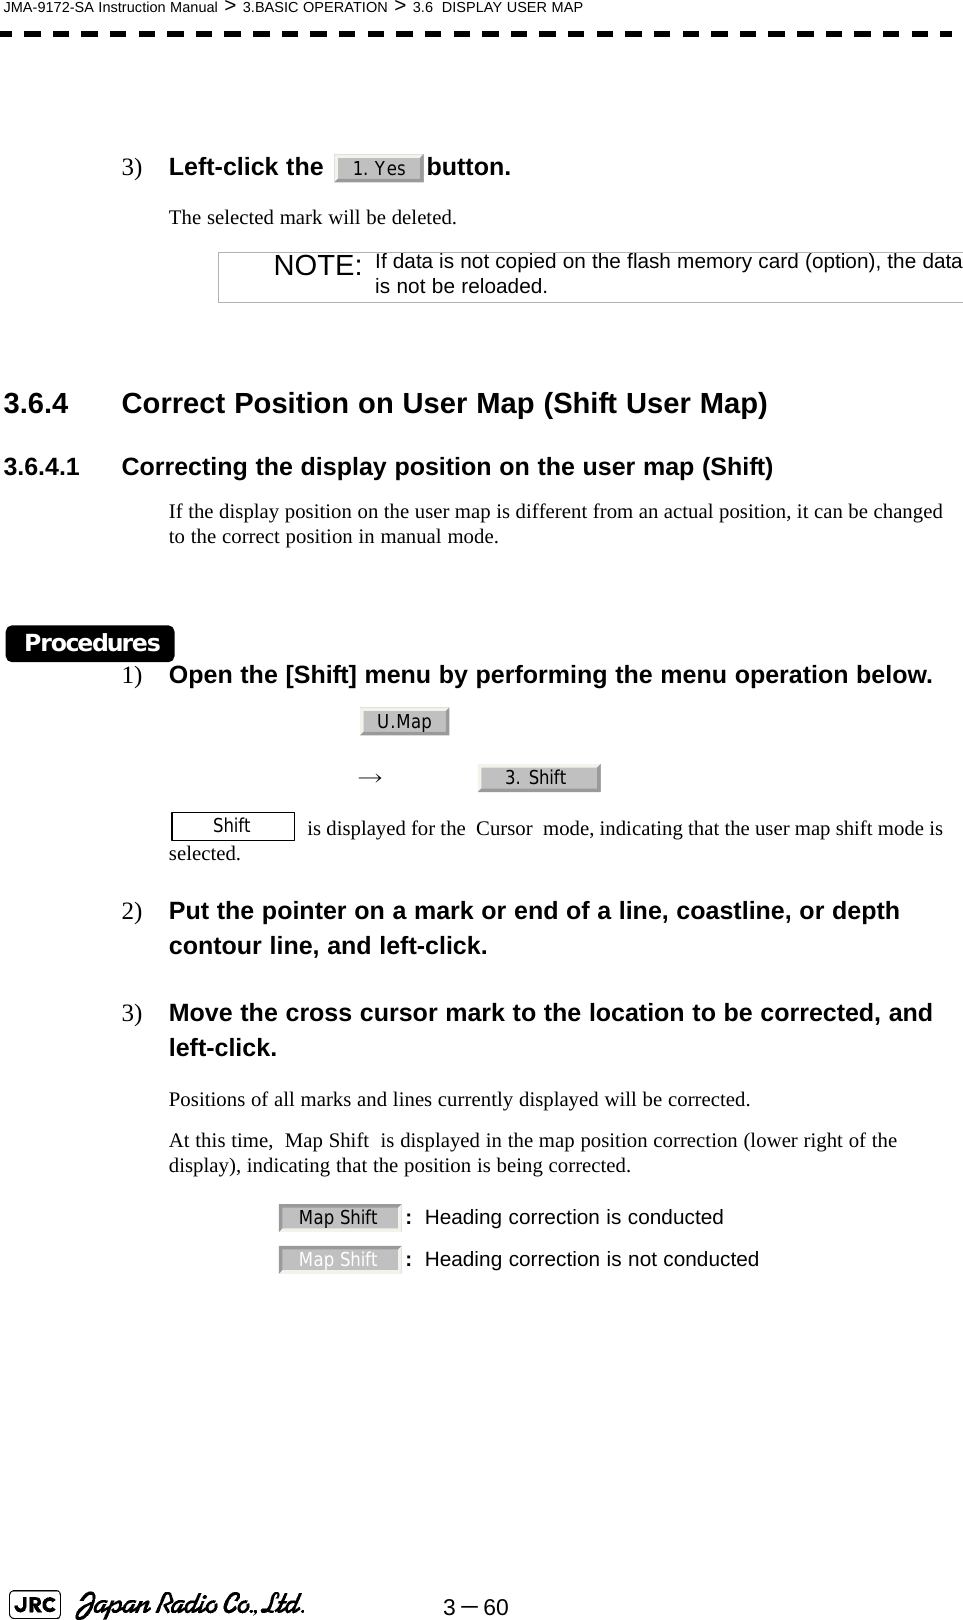 3－60JMA-9172-SA Instruction Manual &gt; 3.BASIC OPERATION &gt; 3.6  DISPLAY USER MAP3) Left-click the  button.The selected mark will be deleted. 3.6.4 Correct Position on User Map (Shift User Map)3.6.4.1 Correcting the display position on the user map (Shift)If the display position on the user map is different from an actual position, it can be changed to the correct position in manual mode.Procedures1) Open the [Shift] menu by performing the menu operation below.　　 →　 is displayed for the  Cursor  mode, indicating that the user map shift mode is selected.2) Put the pointer on a mark or end of a line, coastline, or depth contour line, and left-click.3) Move the cross cursor mark to the location to be corrected, and left-click.Positions of all marks and lines currently displayed will be corrected.At this time,  Map Shift  is displayed in the map position correction (lower right of the display), indicating that the position is being corrected.NOTE: If data is not copied on the flash memory card (option), the datais not be reloaded.:Heading correction is conducted:Heading correction is not conducted1. YesU.Map3. ShiftShiftMap ShiftMap Shift 